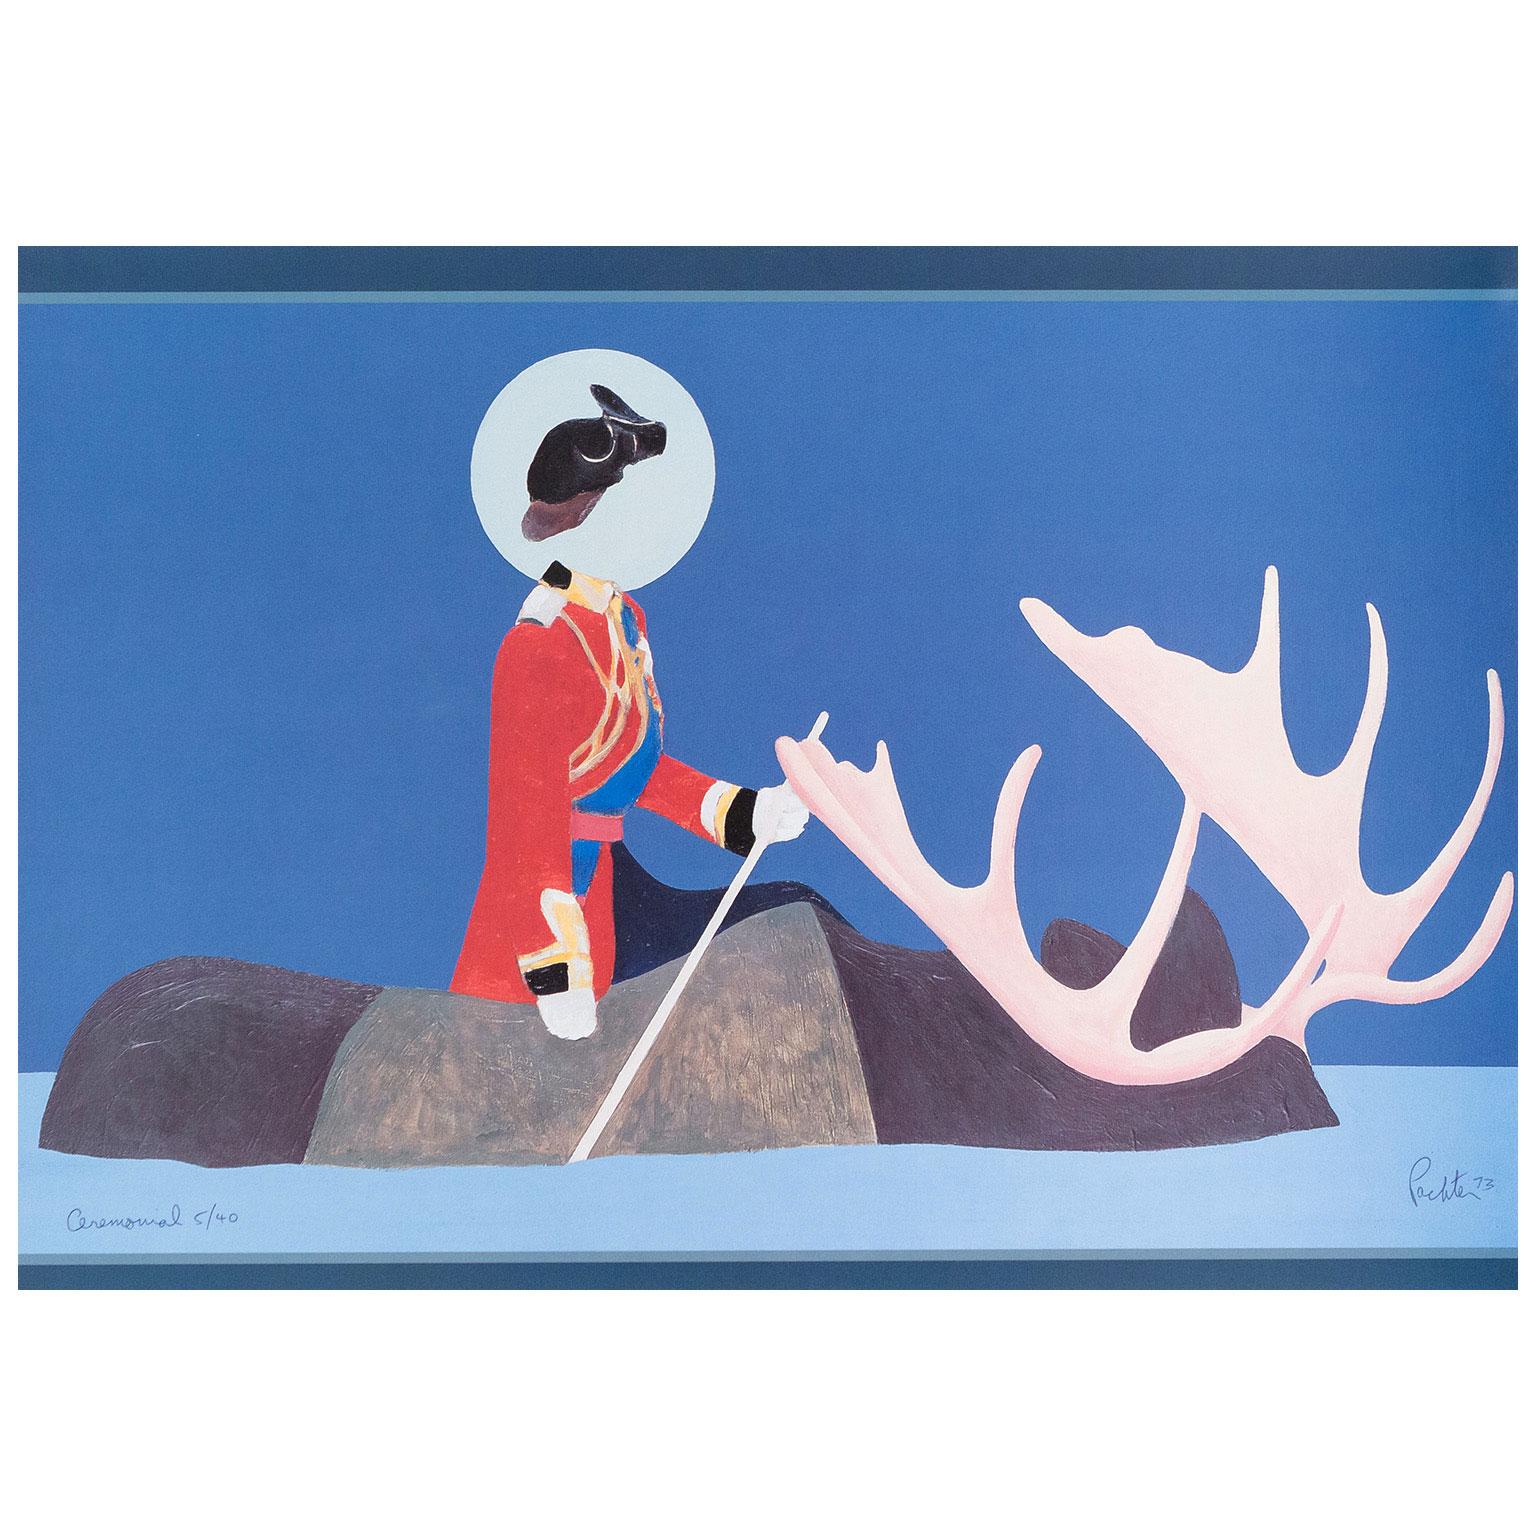 Ceremonial - Print by Charles Pachter